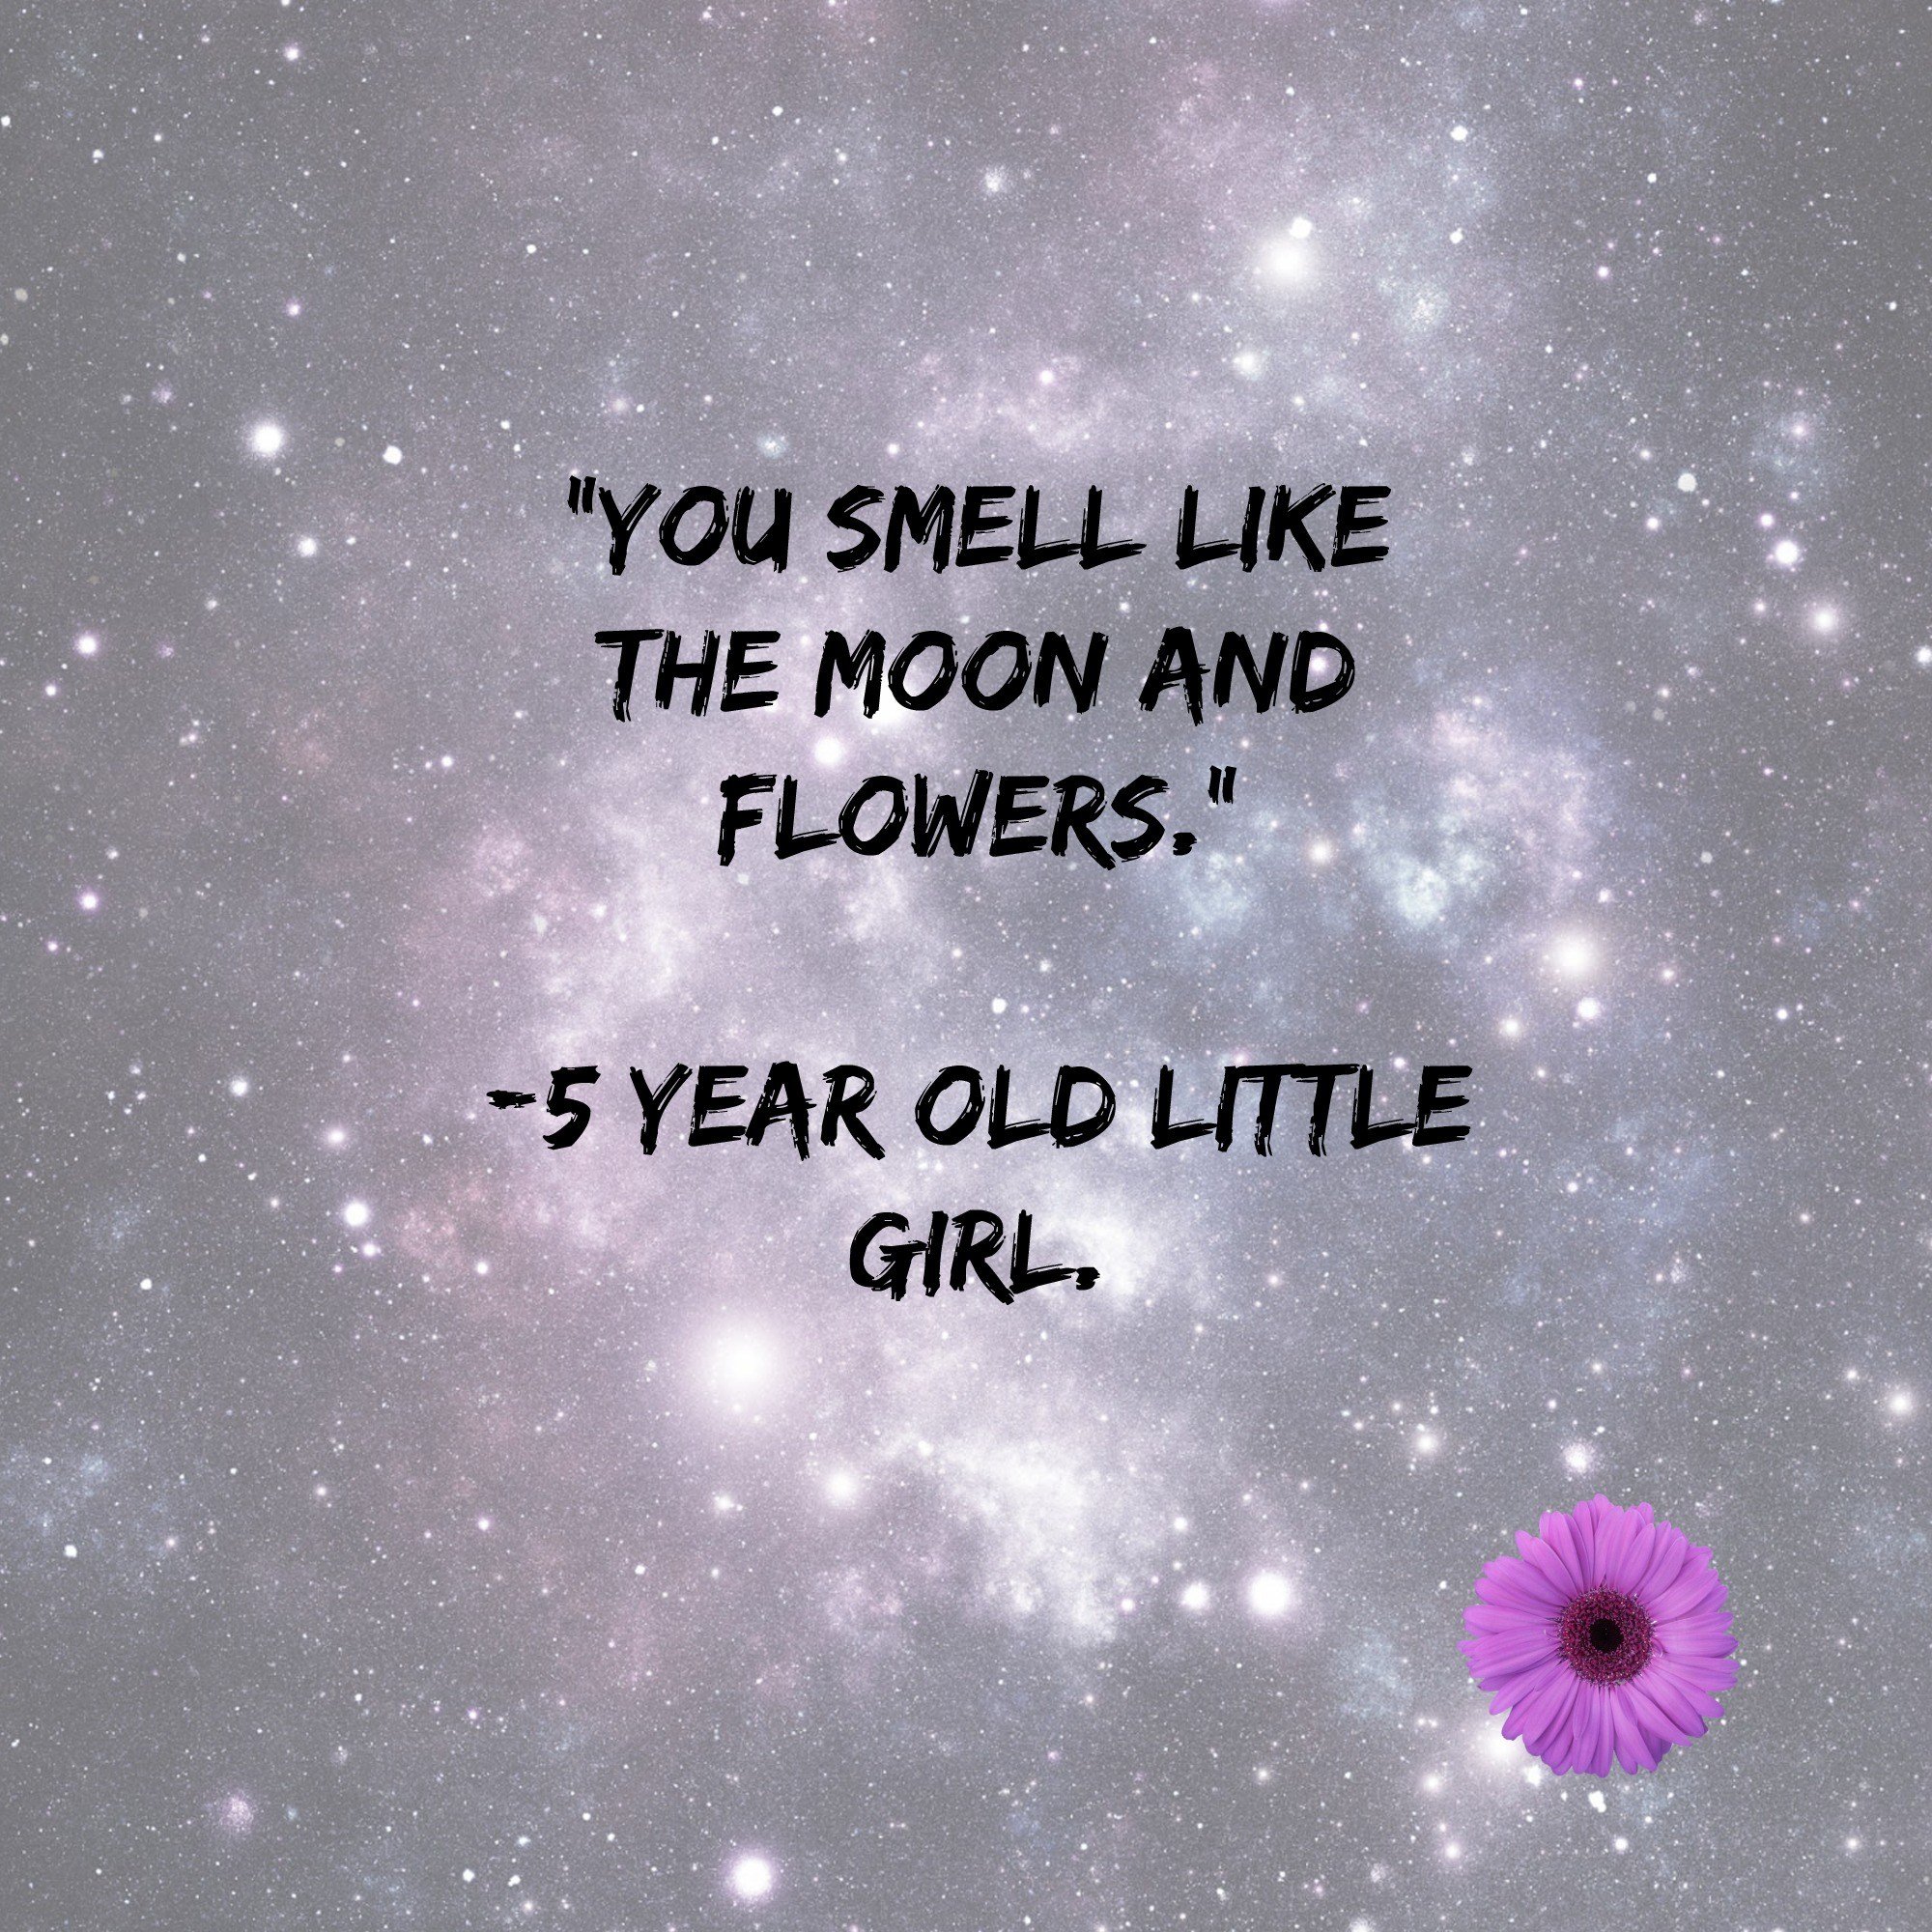 You smell like moon and flowers